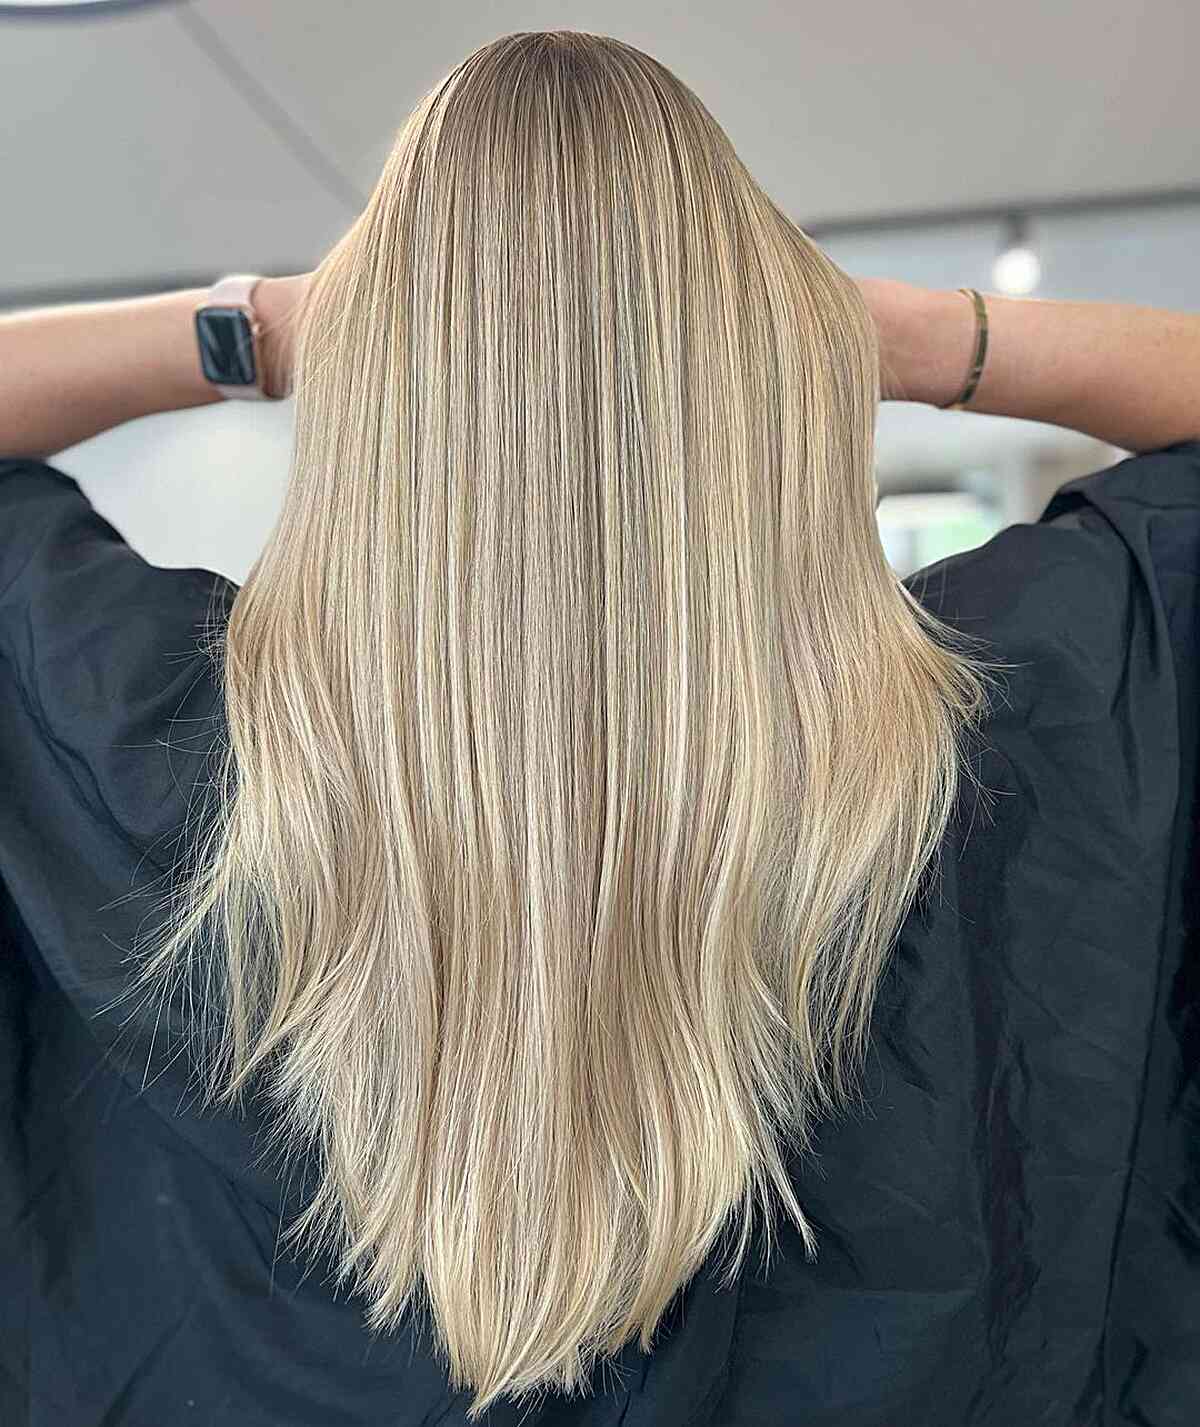 Cool Blonde Balayage Hue with Long Straight V-Shaped Cut and Subtle Layers